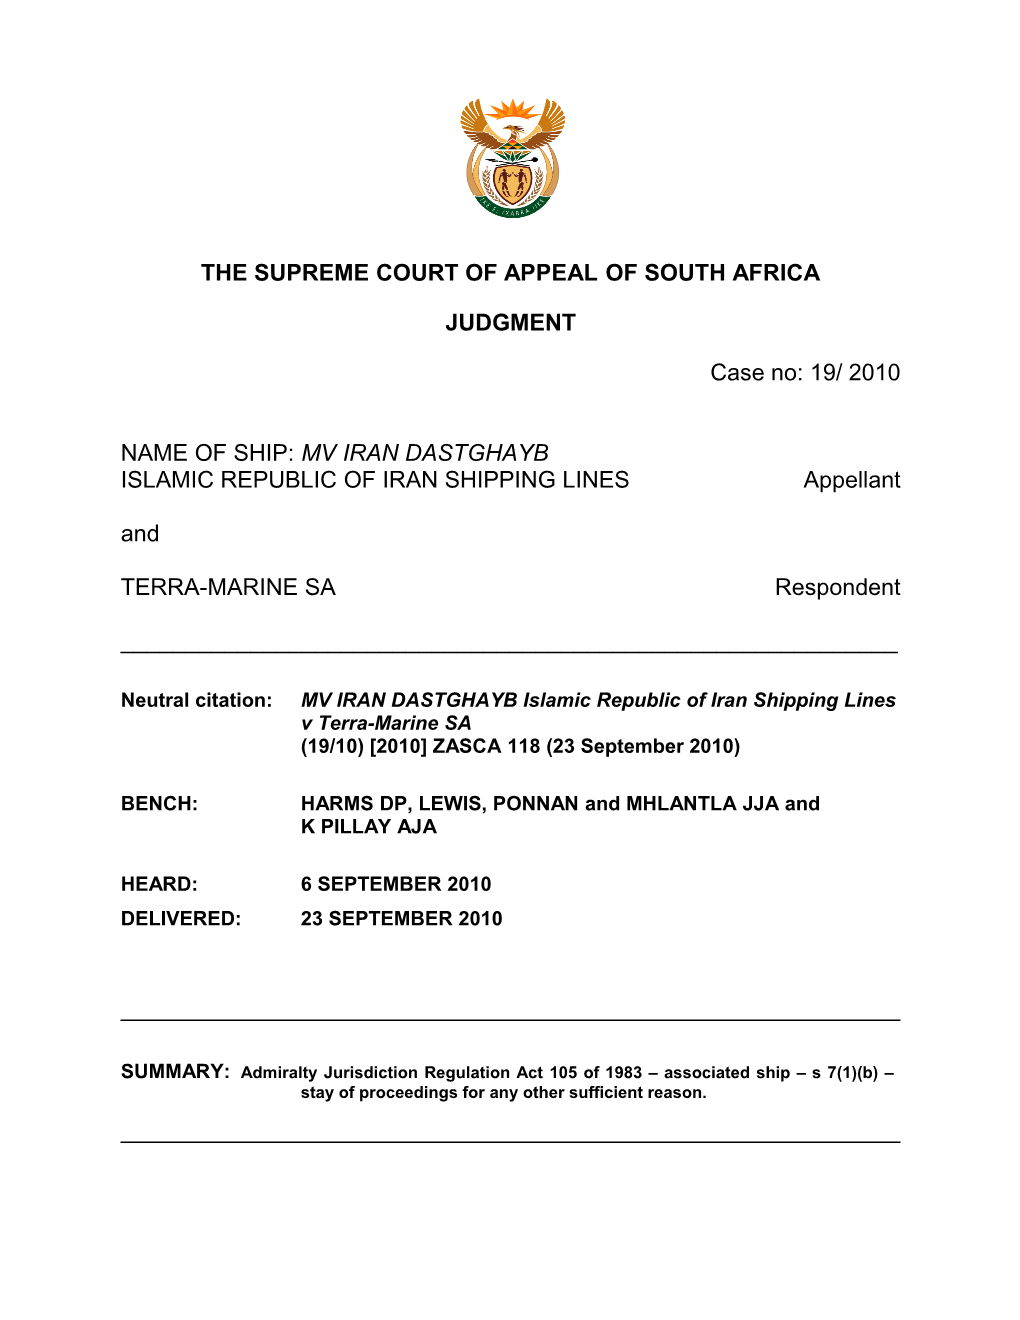 The Supreme Court of Appeal of South Africa s8